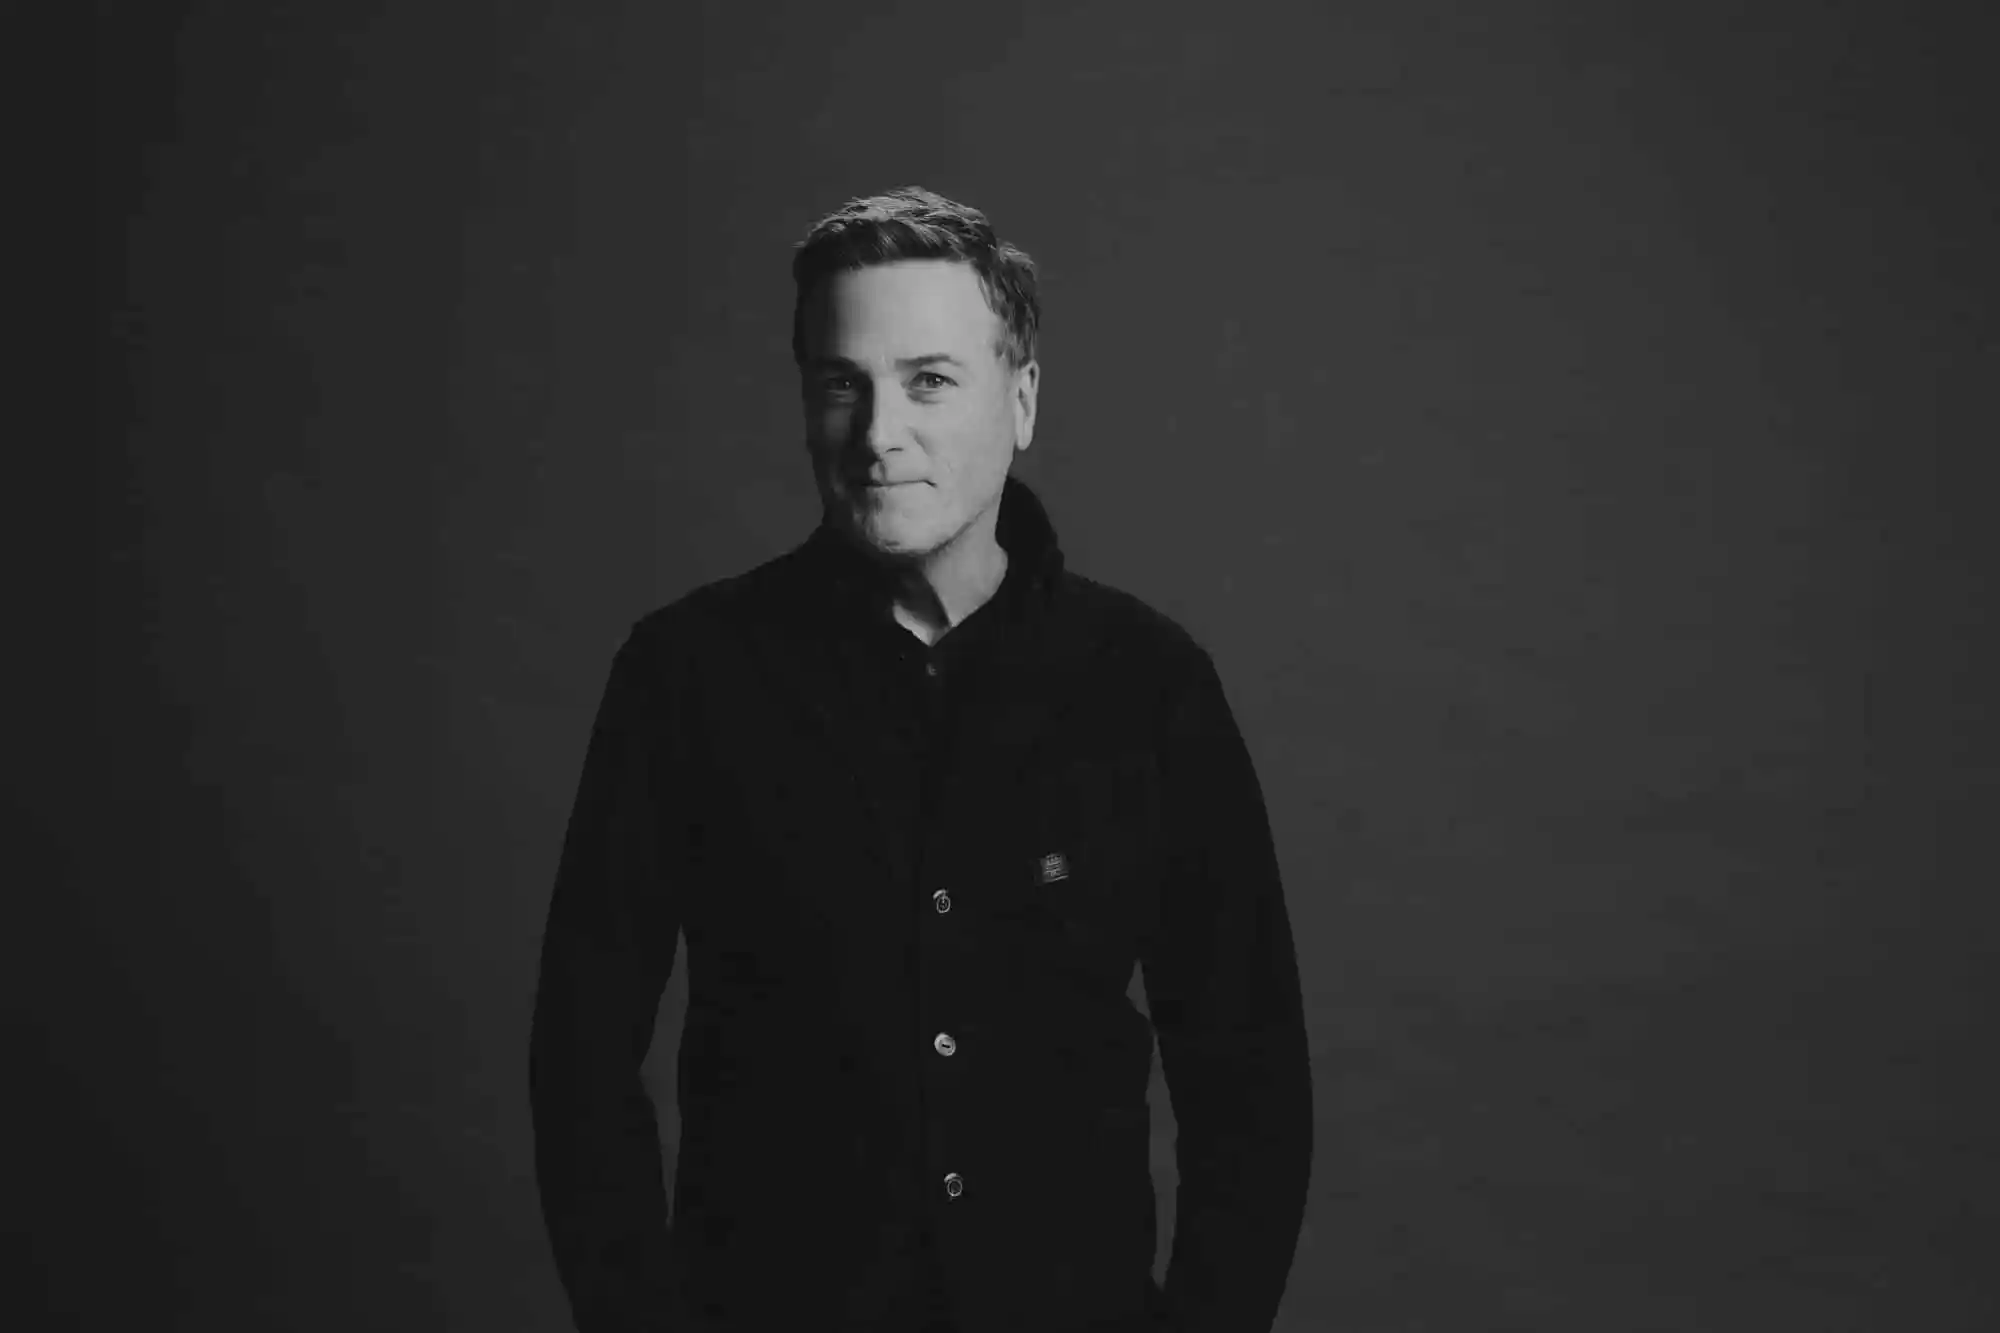 Michael W. Smith Wants People to Talk More, Starts the “Conversation”